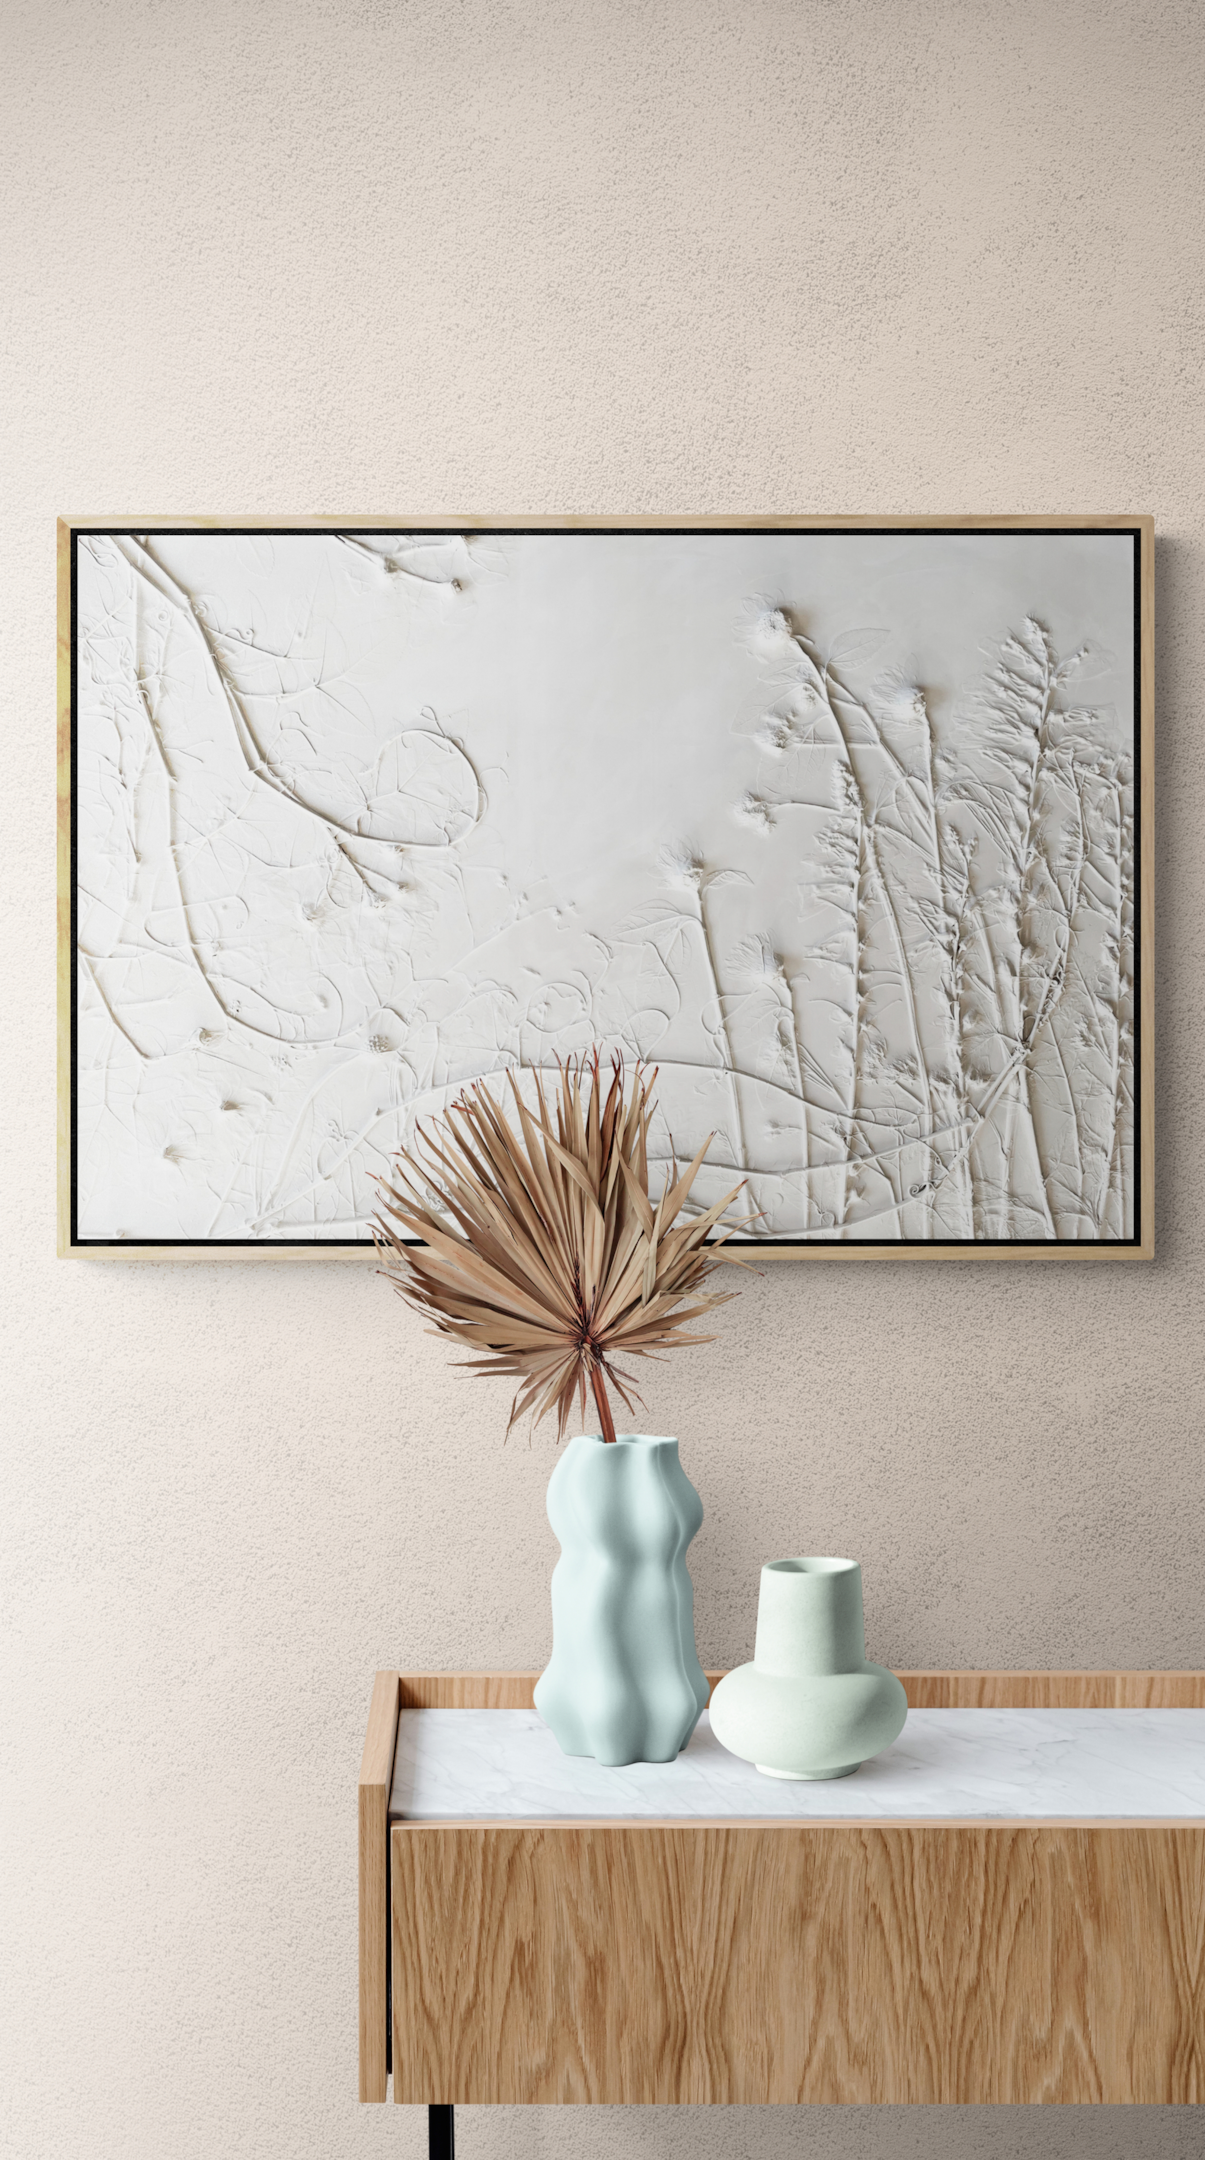 "Jardin d’agrément" by Melissa Mulder, providing a timeless feeling within a transitional space.